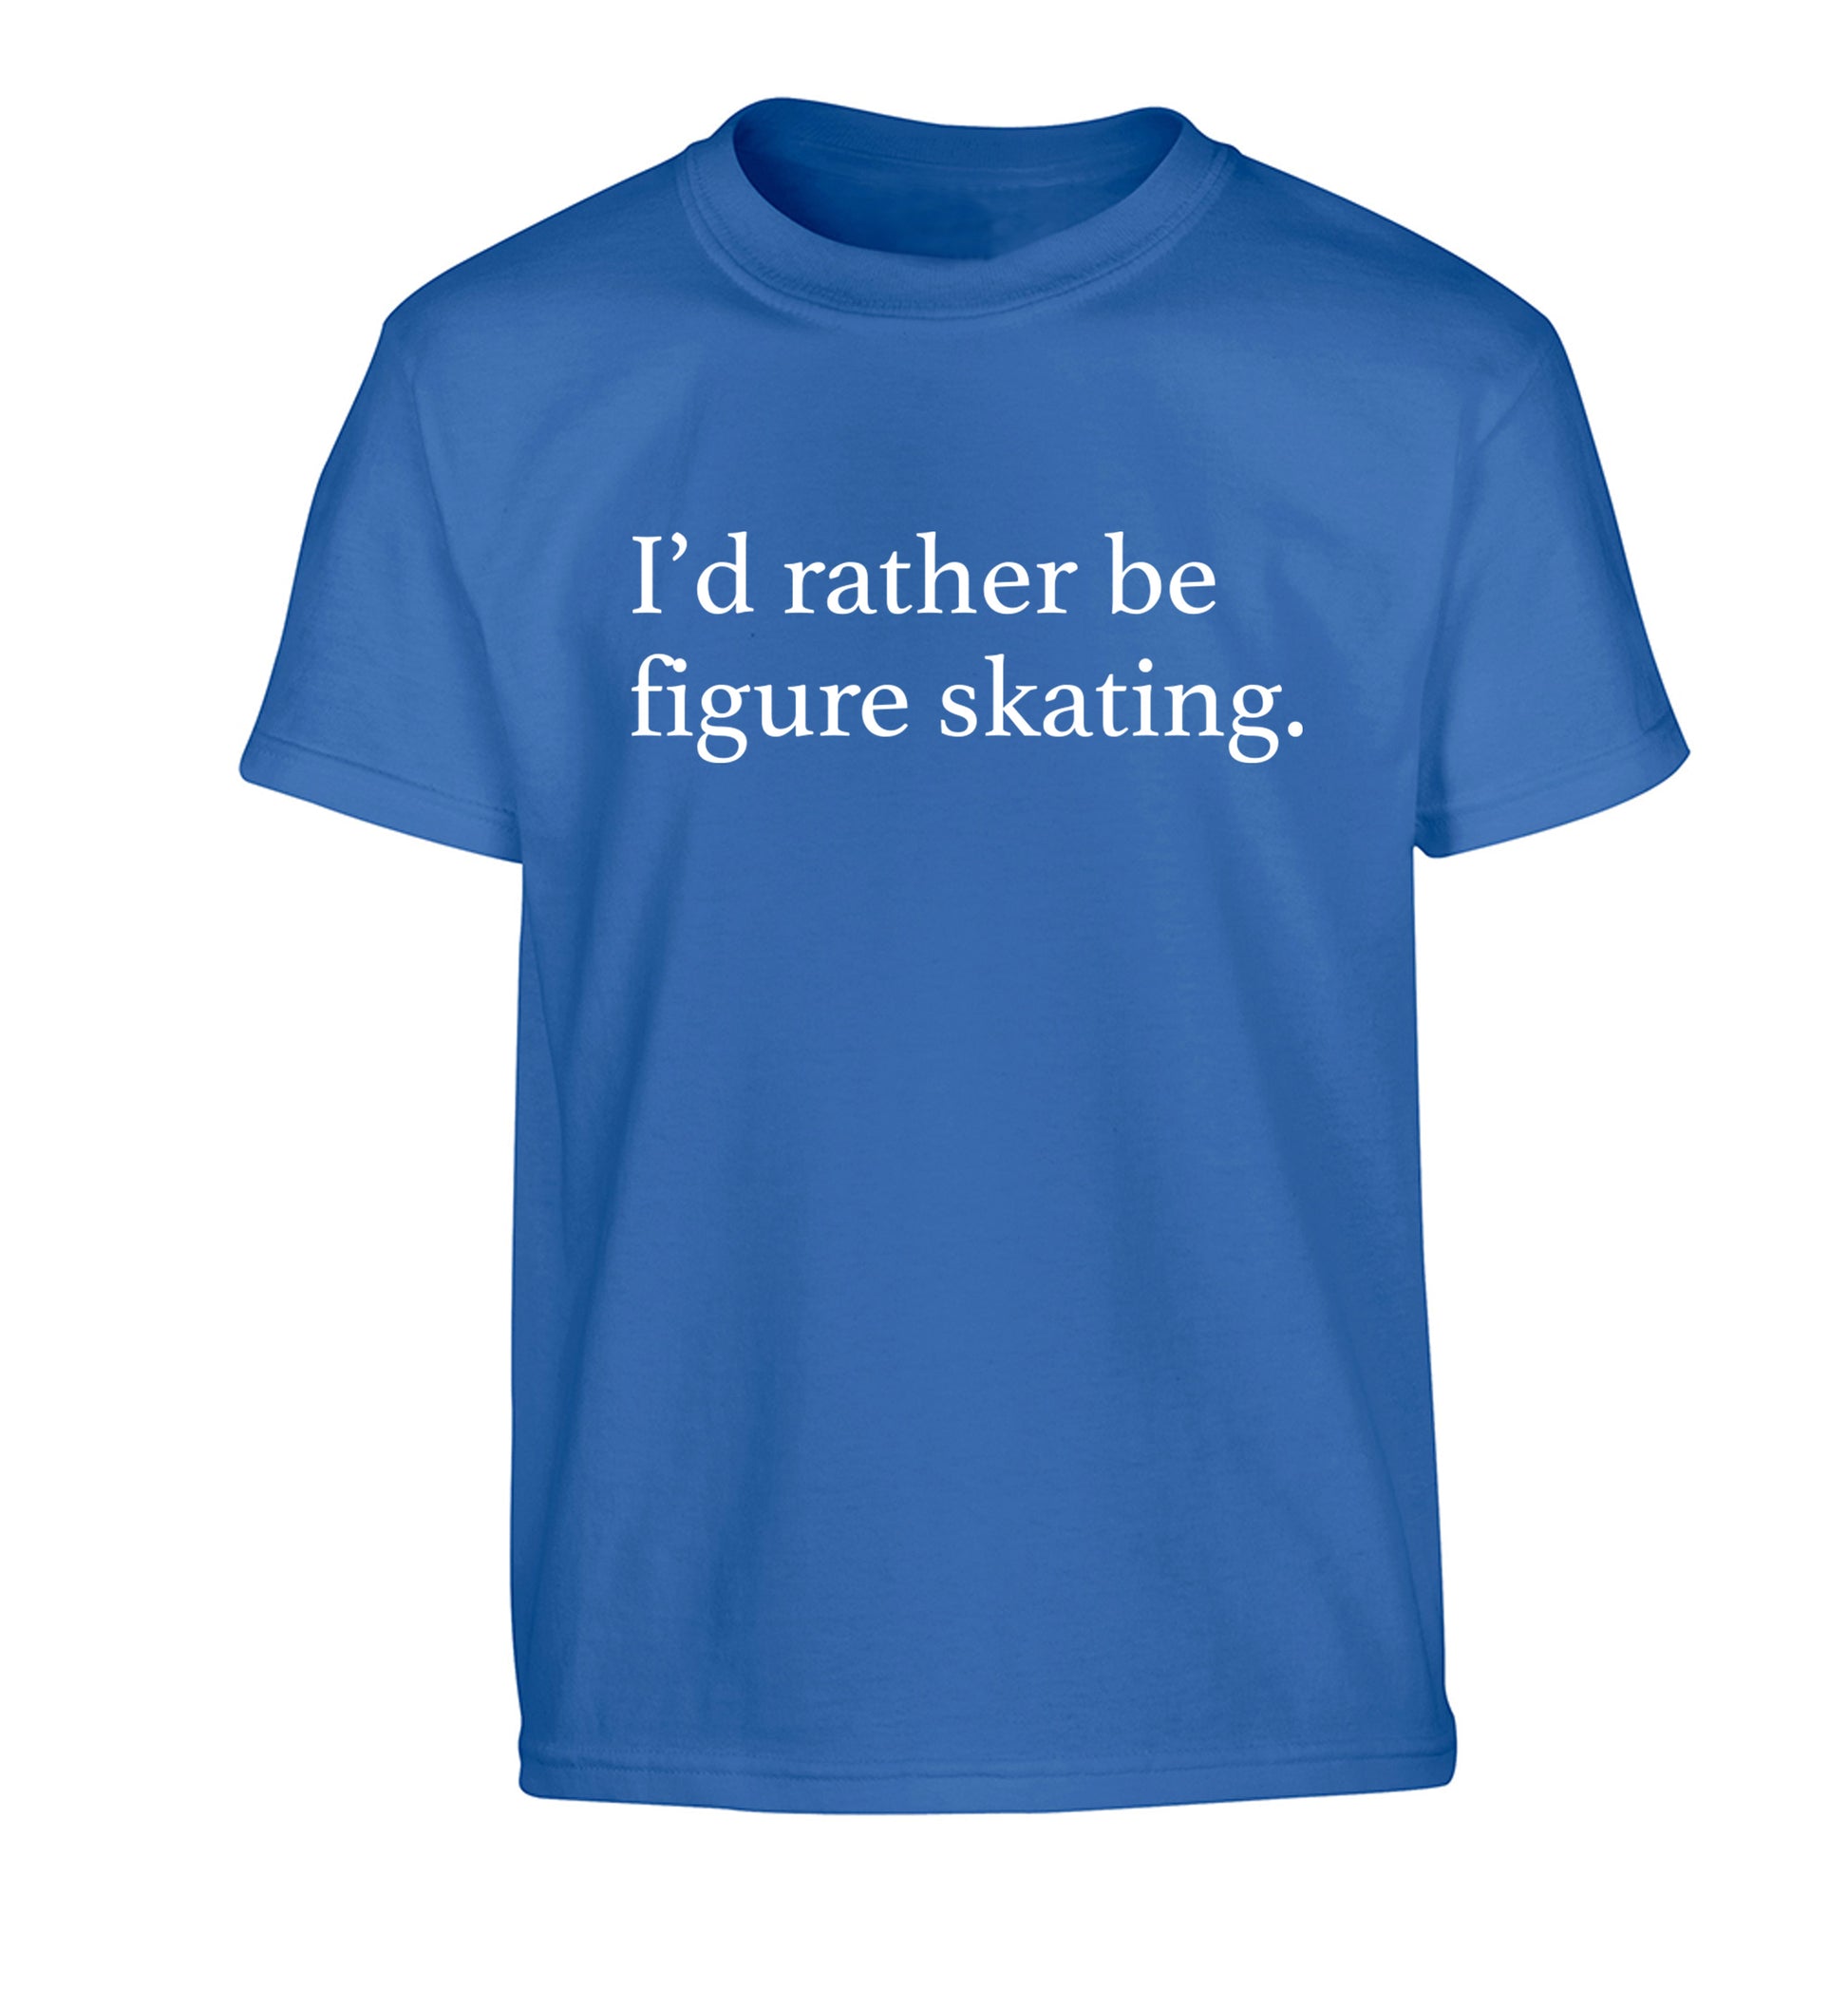 I'd rather be figure skating Children's blue Tshirt 12-14 Years